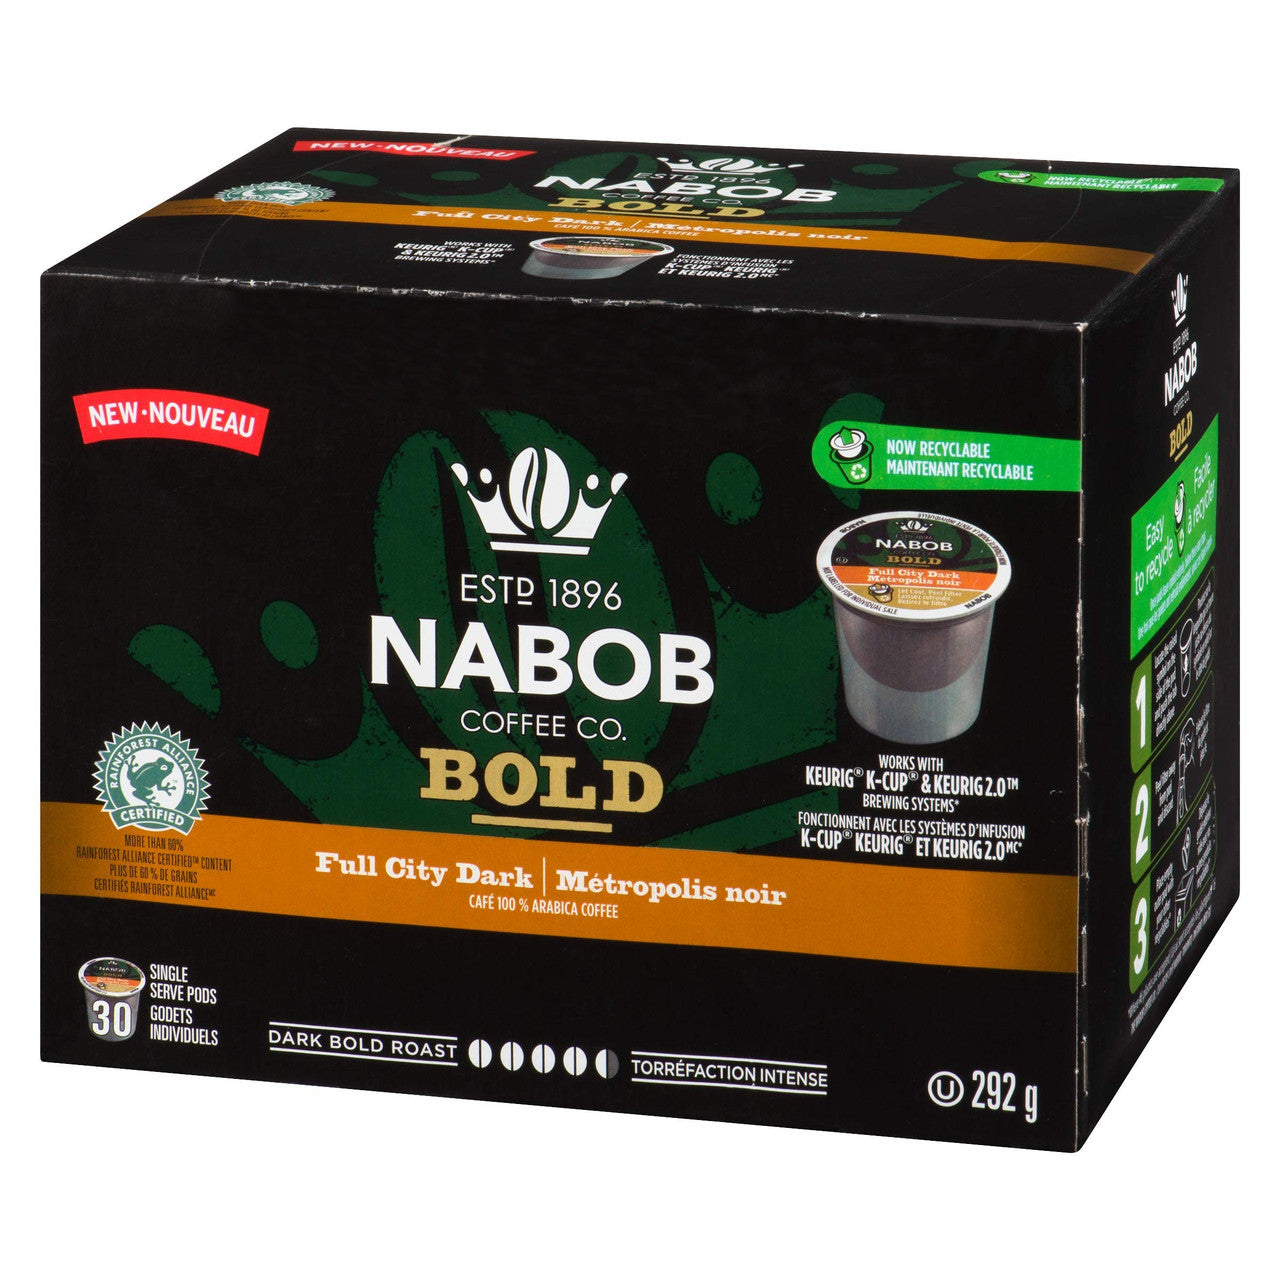 NABOB Full City Dark Coffee Pods, 292g, 30 Count {Imported from Canada}